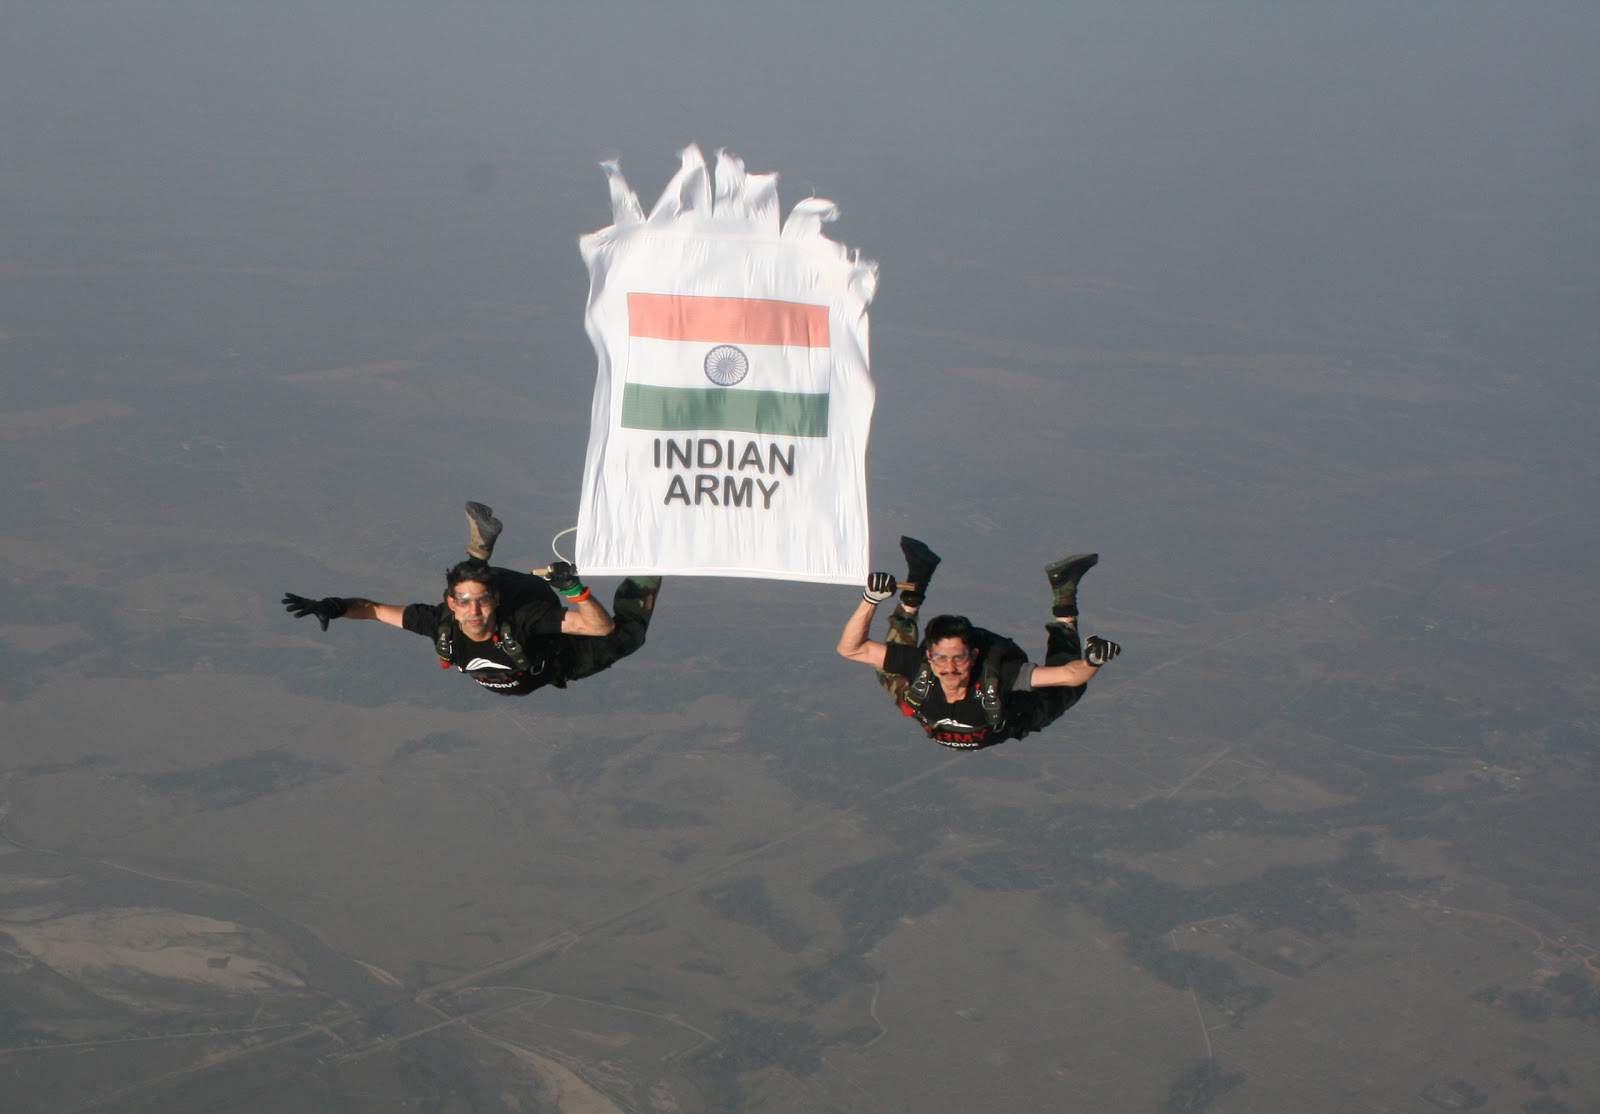 Indian Army Skydiving